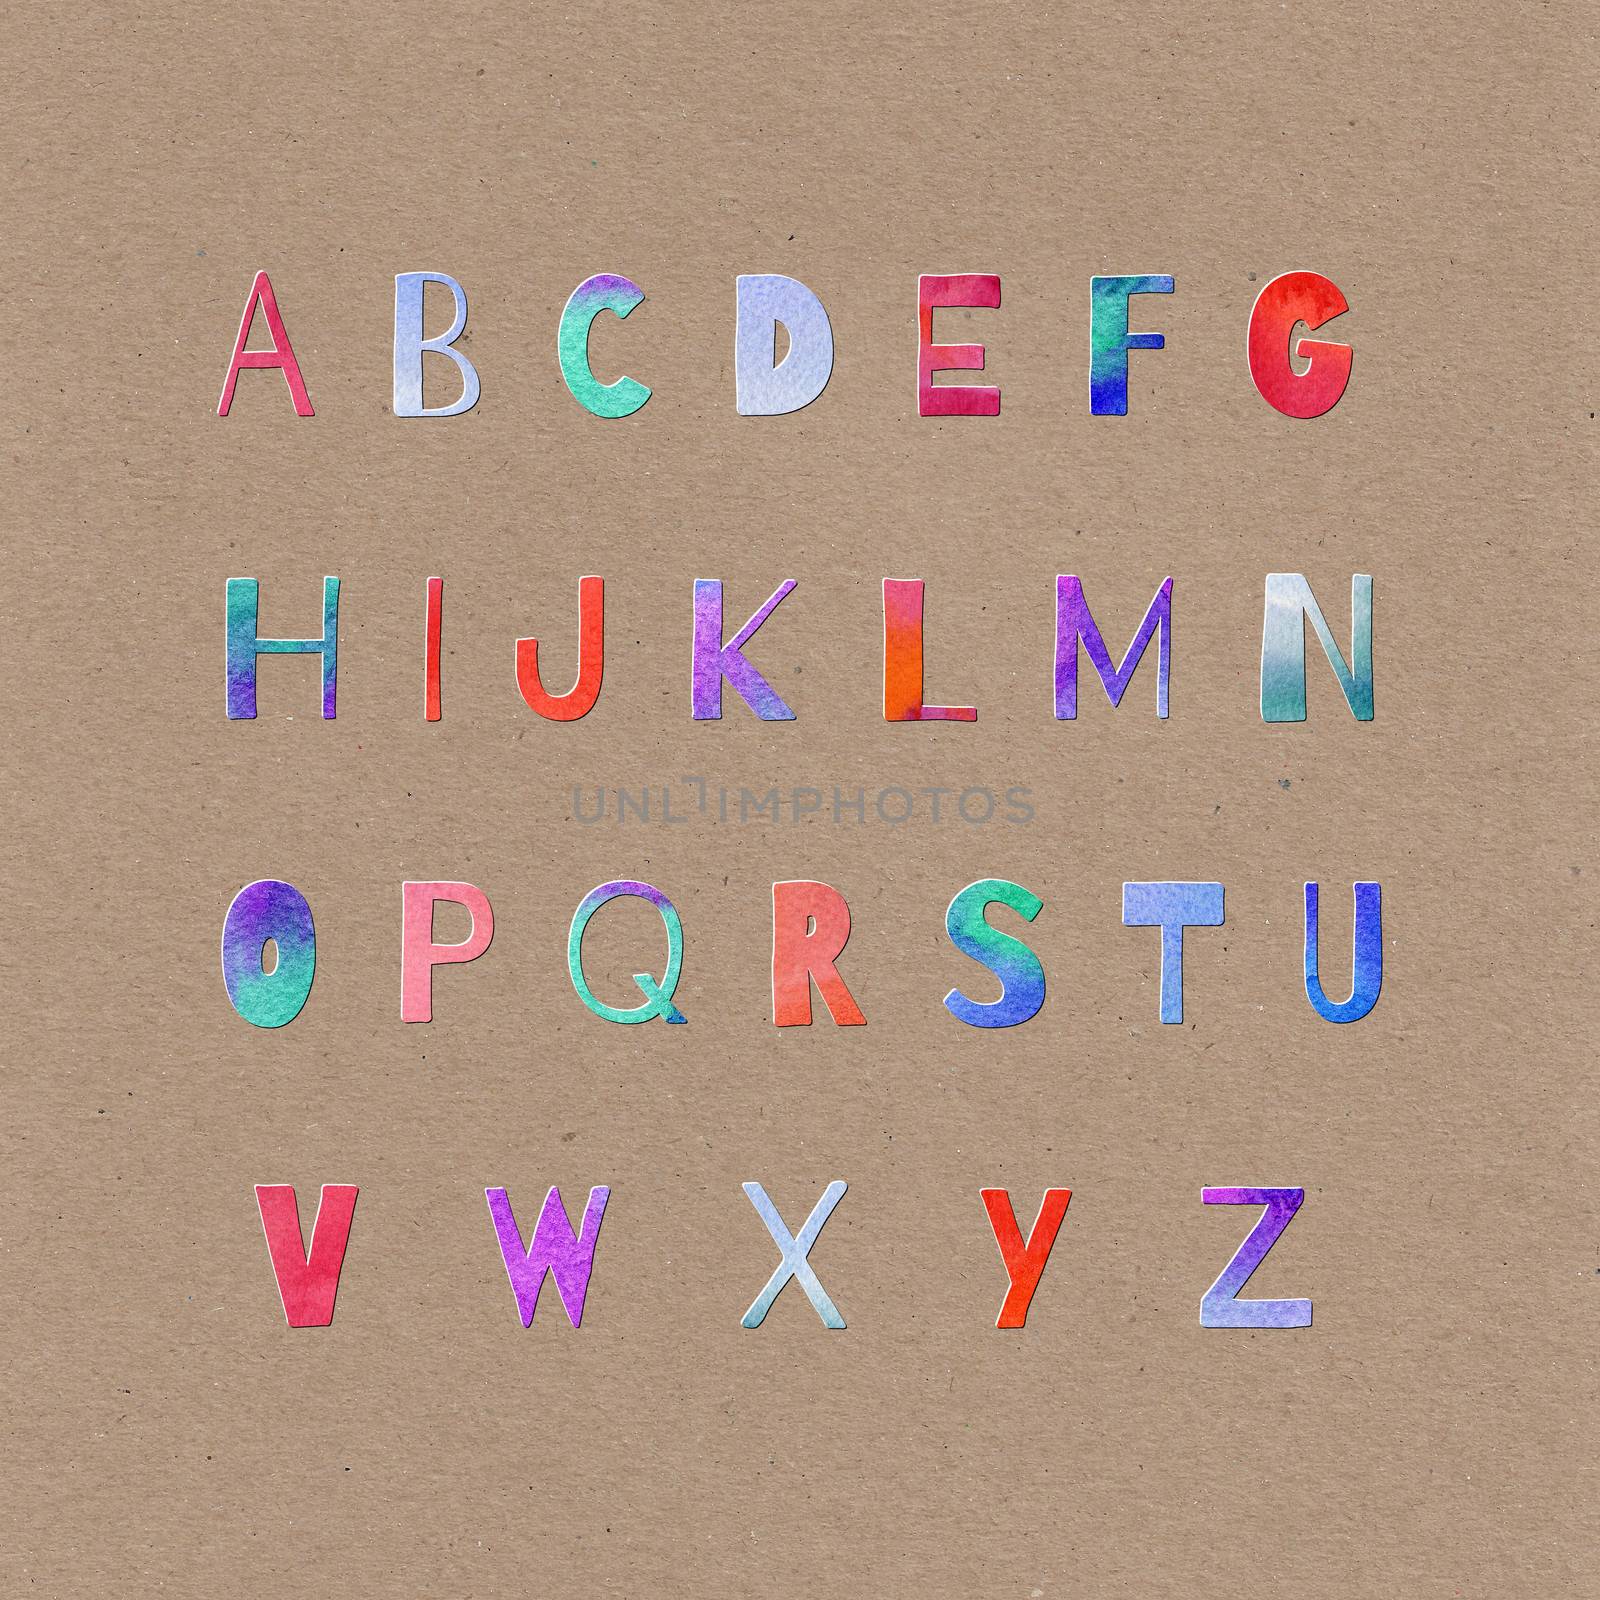 Hand painted watercolor alphabet letters in violet, blue and pink colors. Сollage of paper-cut abc elements on craft paper. Artistic lettering set perfect for print, poster.